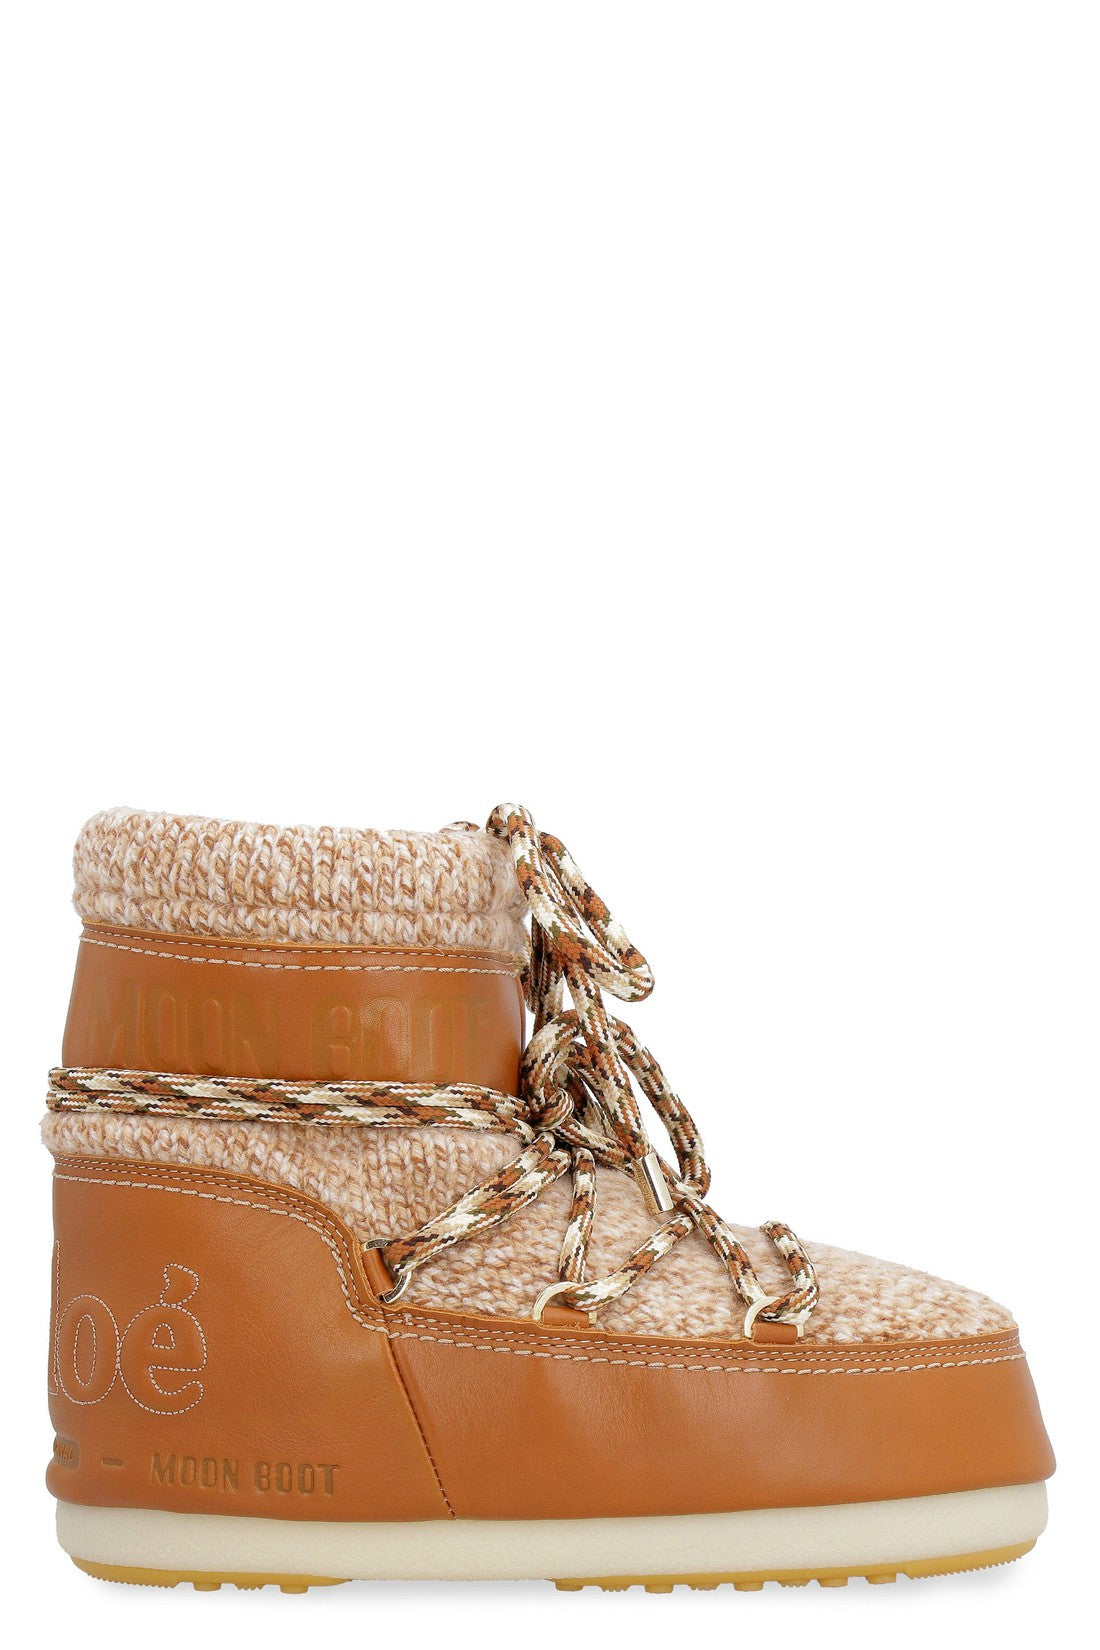 Chloé-OUTLET-SALE-Chloé x Moon Boot - Leather and knit Moon Boots-ARCHIVIST